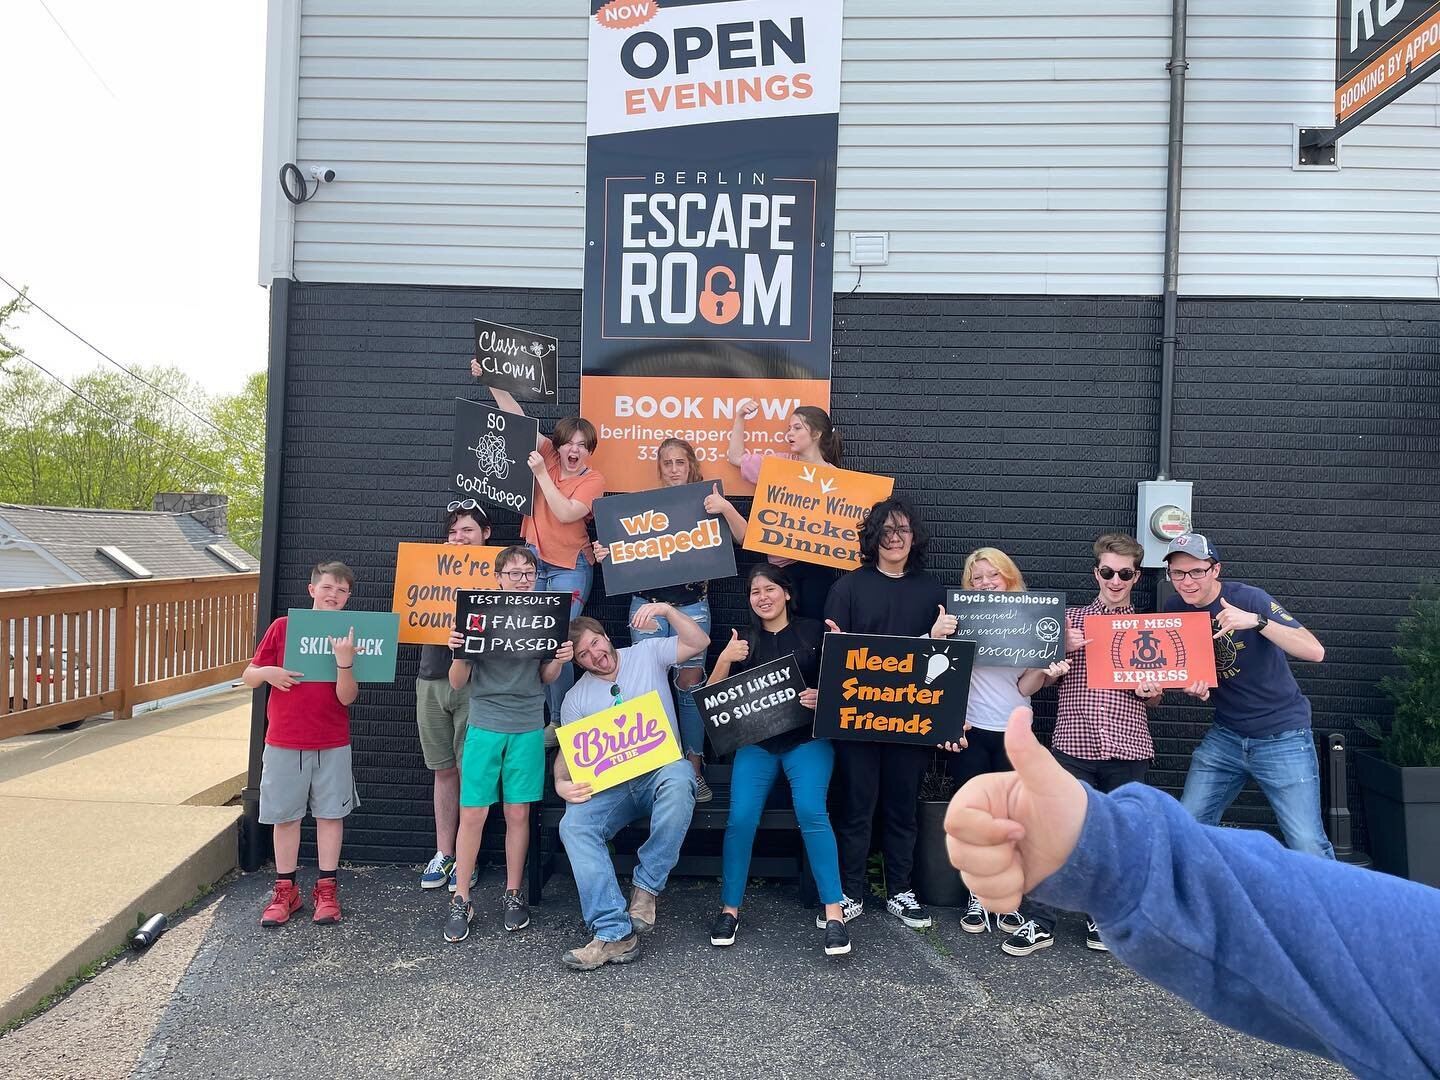 Last HCA Next Gen! Today, we finished with a trip to the Berlin Escape Room. It&rsquo;s been a blessing connecting with these students this semester!